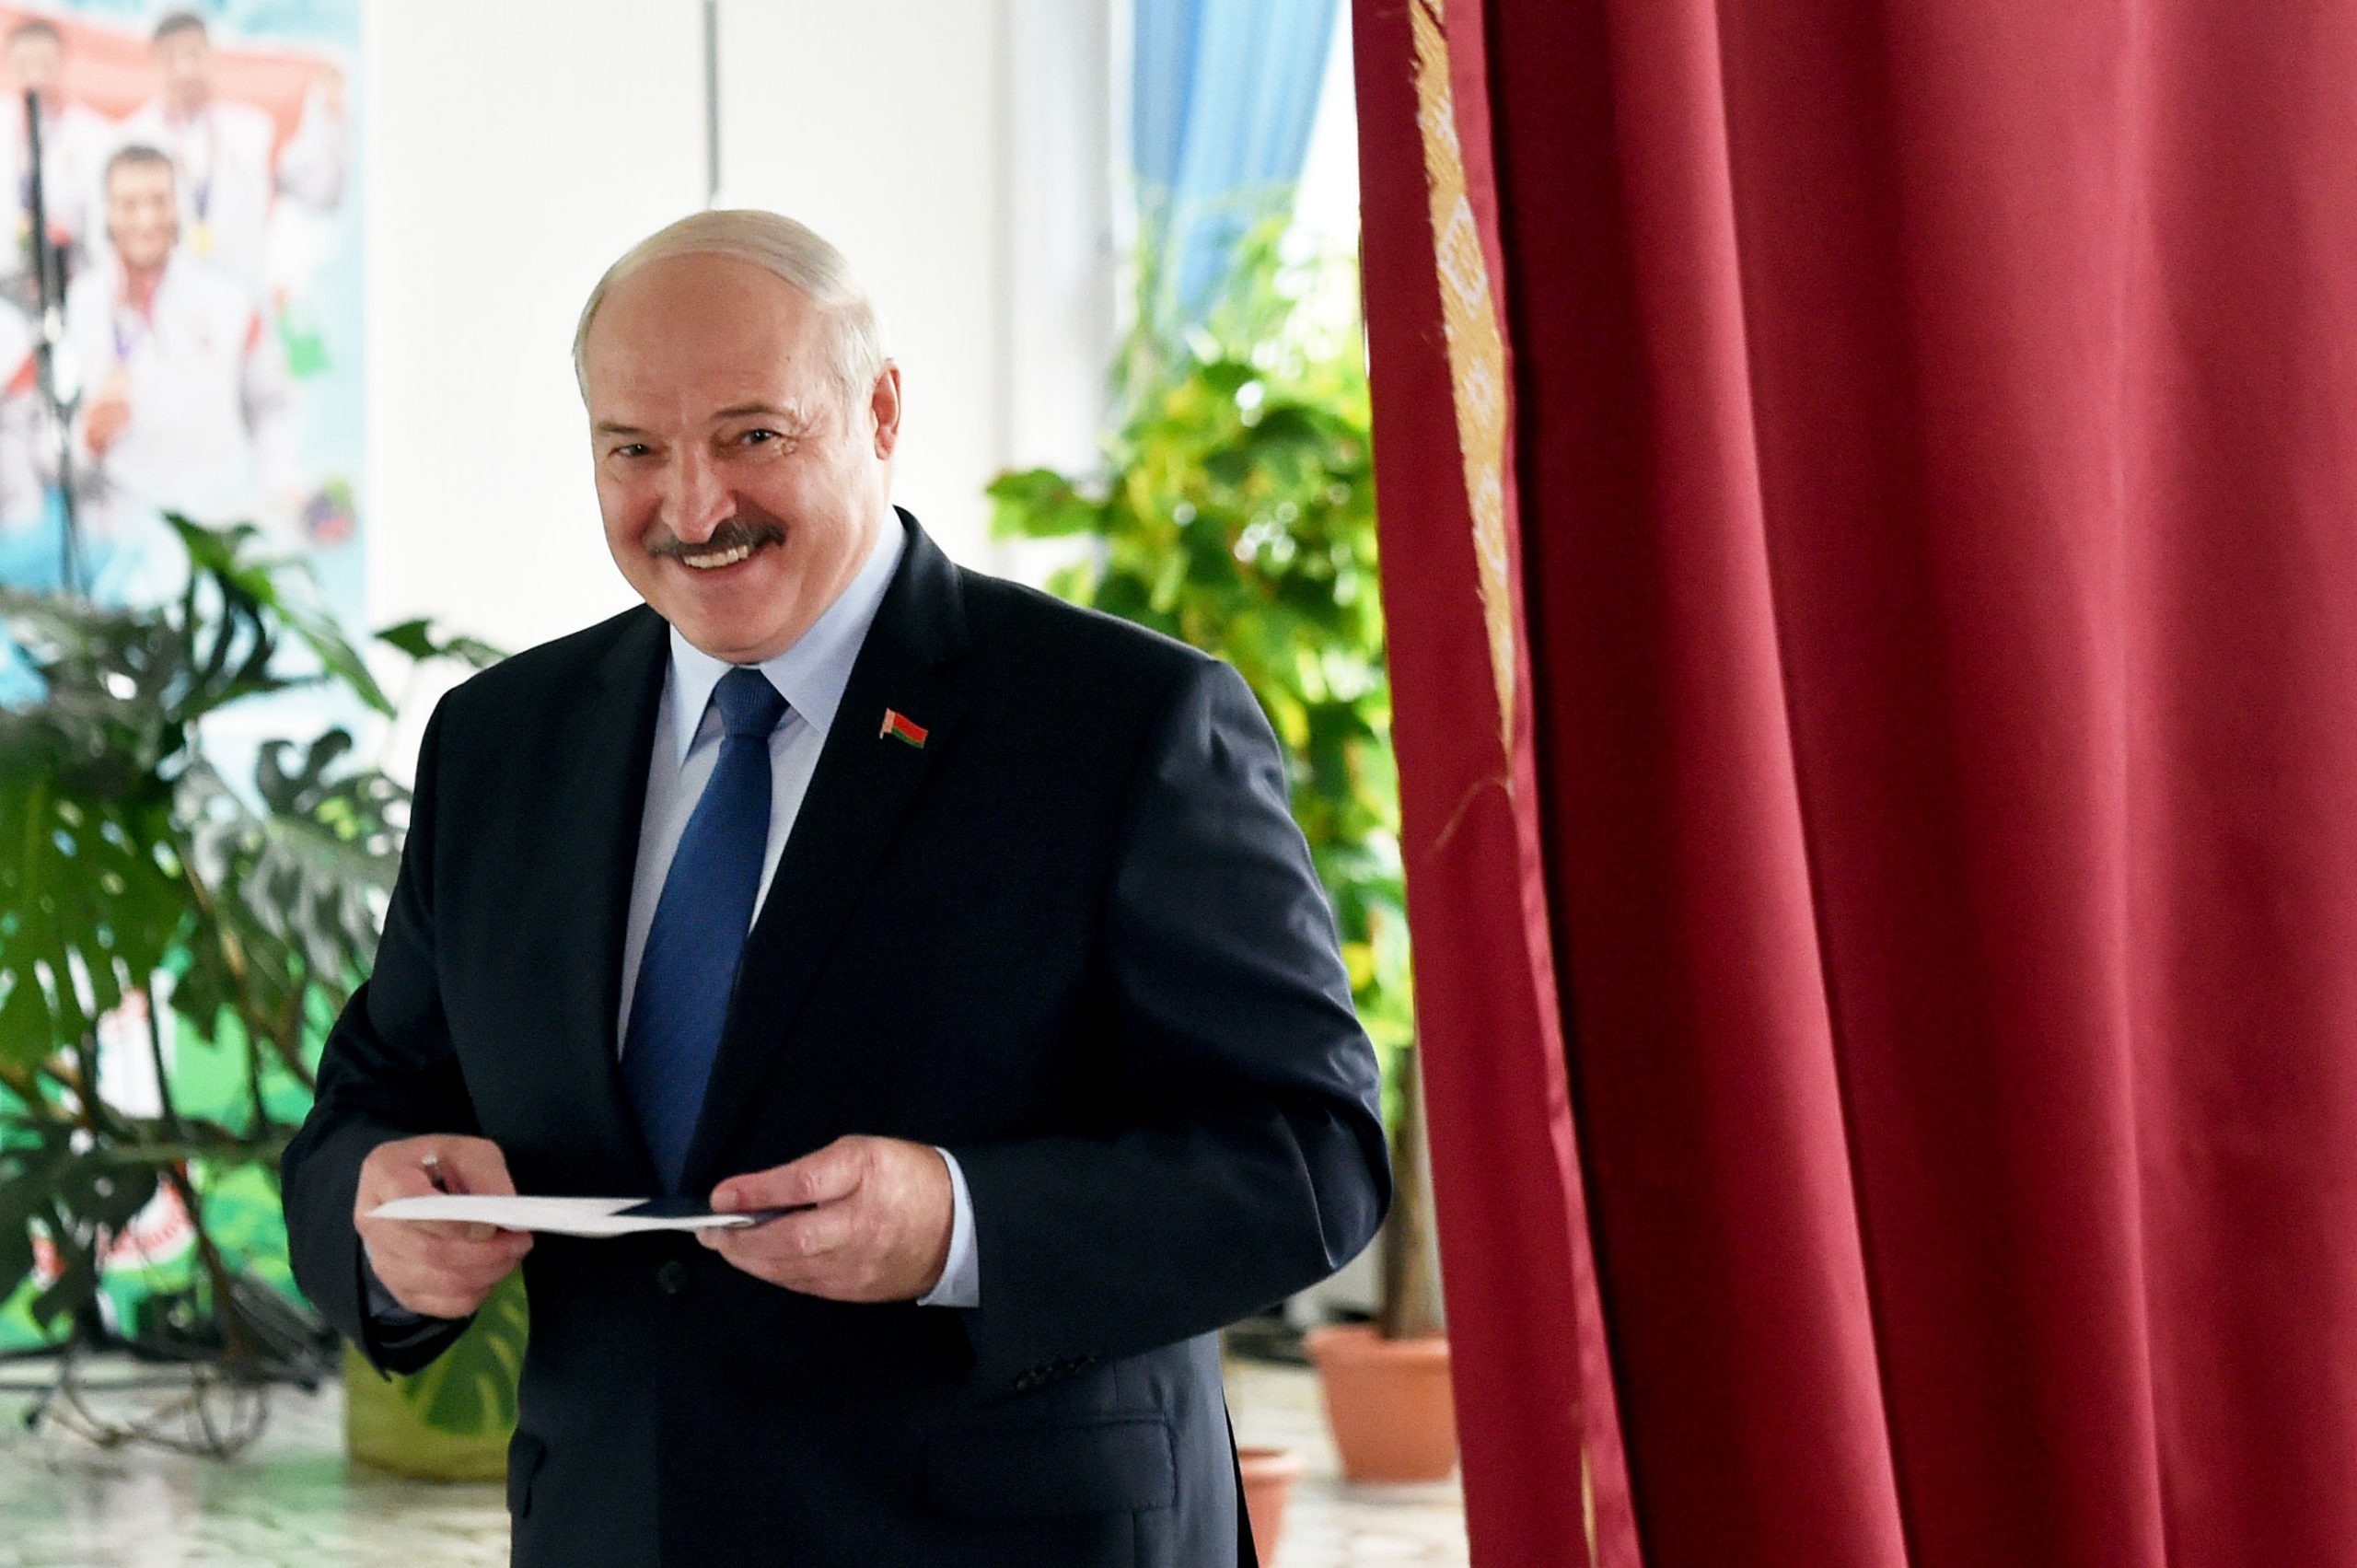 Will not hesitate: Belarus President on bringing Russian troops if needed